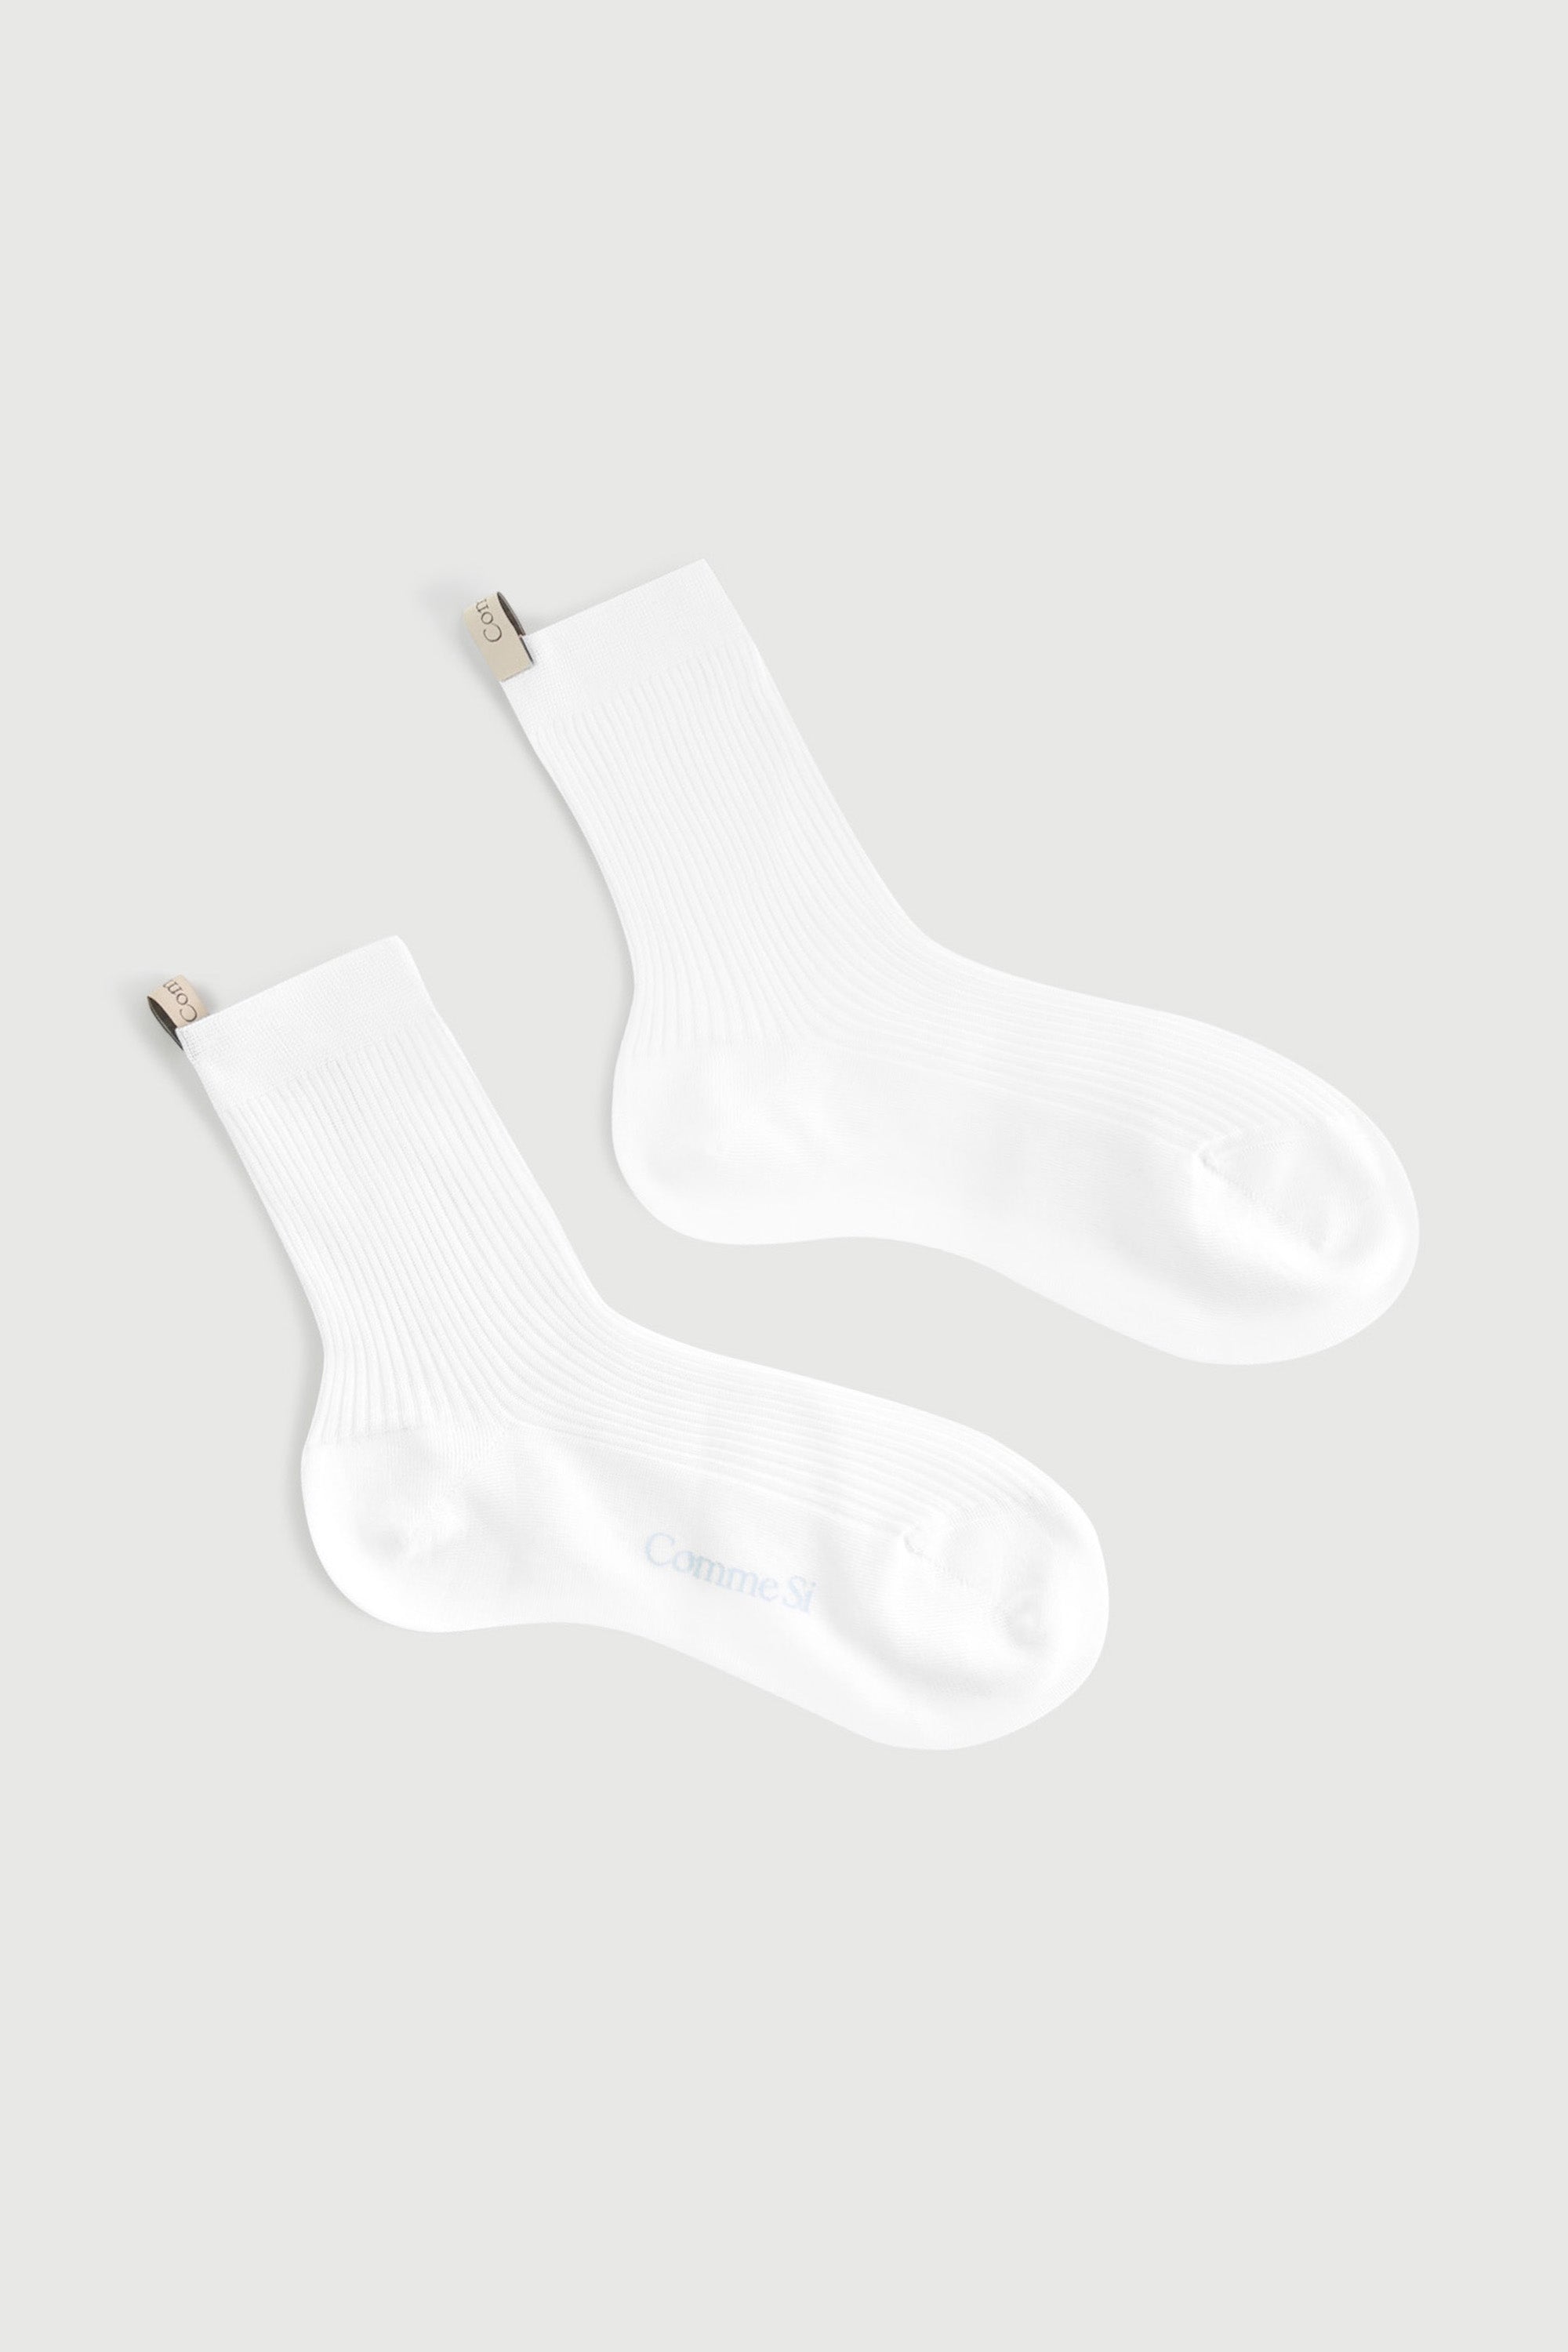 The Agnelli Sock in White, Egyptian Cotton